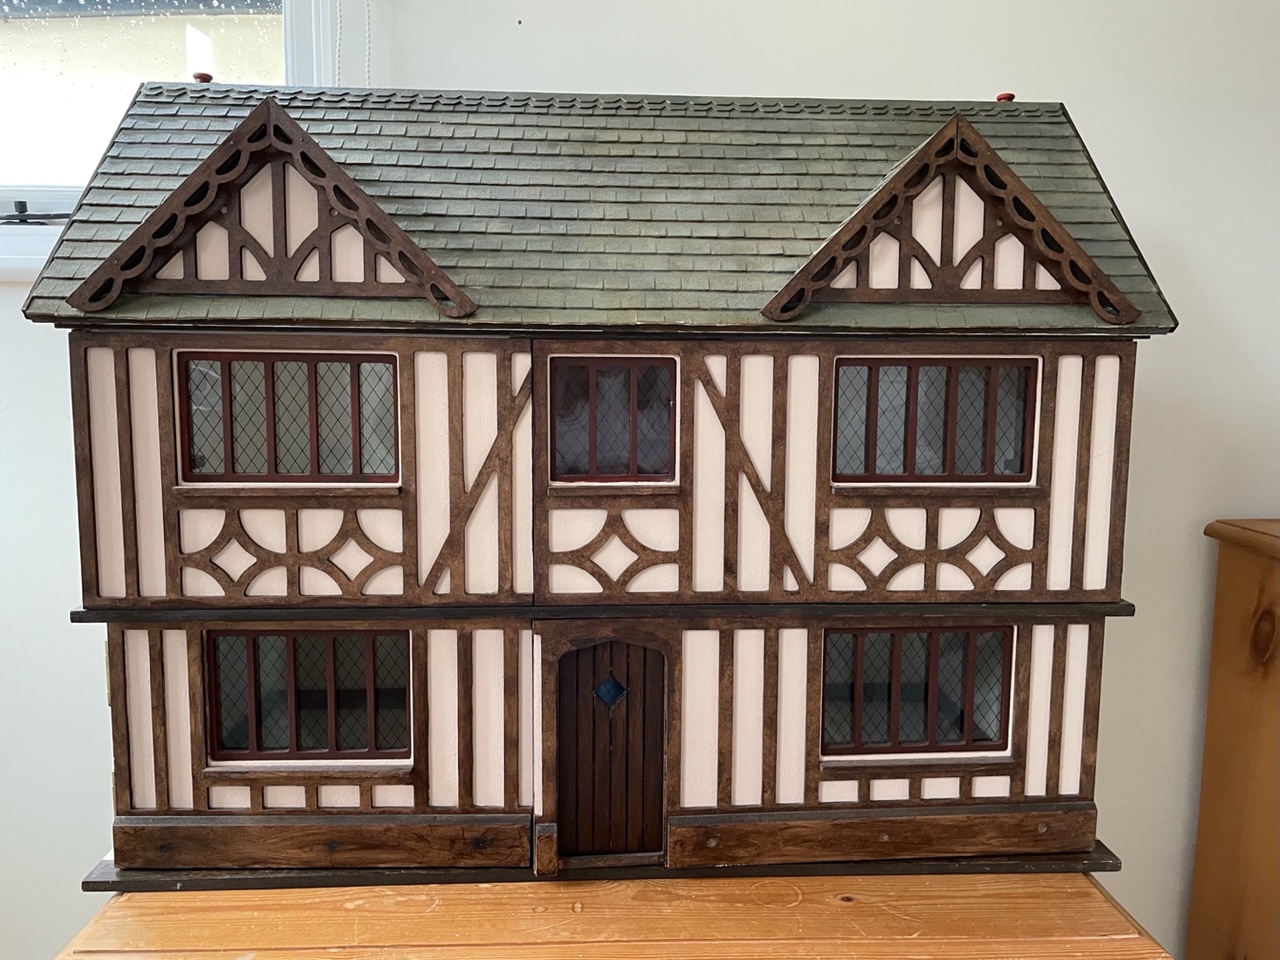 Ye olde style doll's house exterior